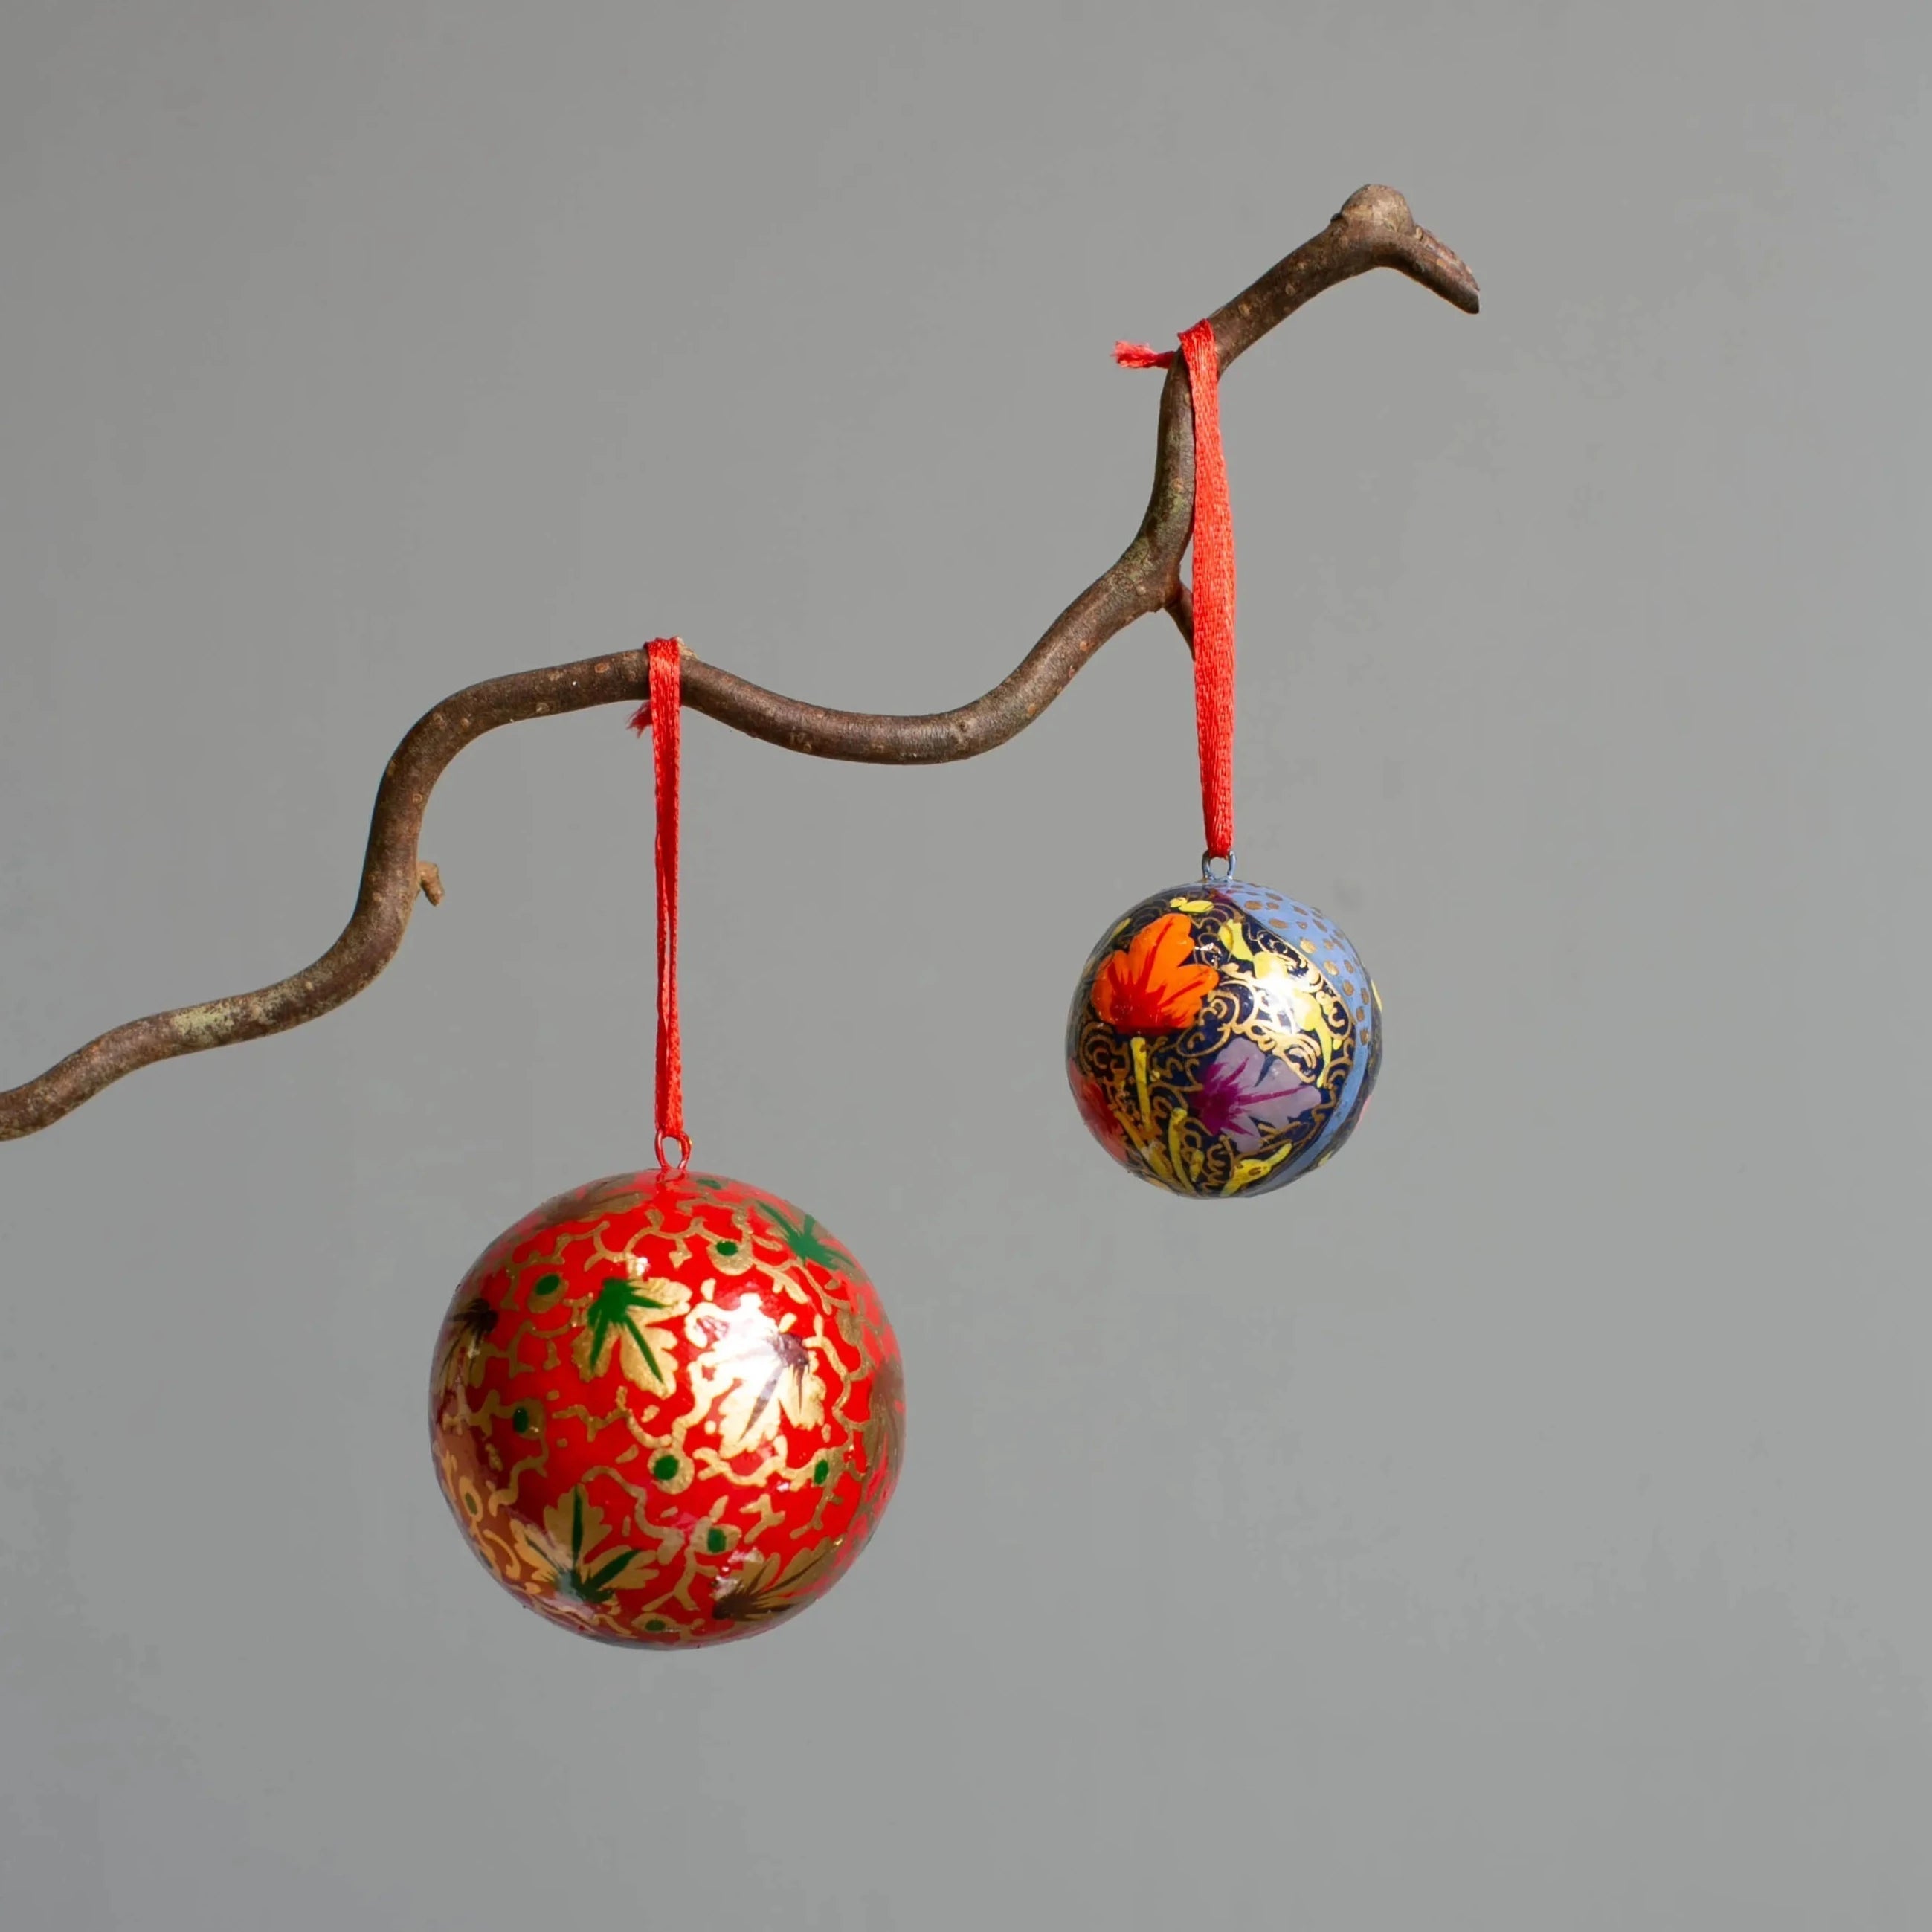 2 Inch Classic Bauble - The Nancy Smillie Shop - Art, Jewellery & Designer Gifts Glasgow